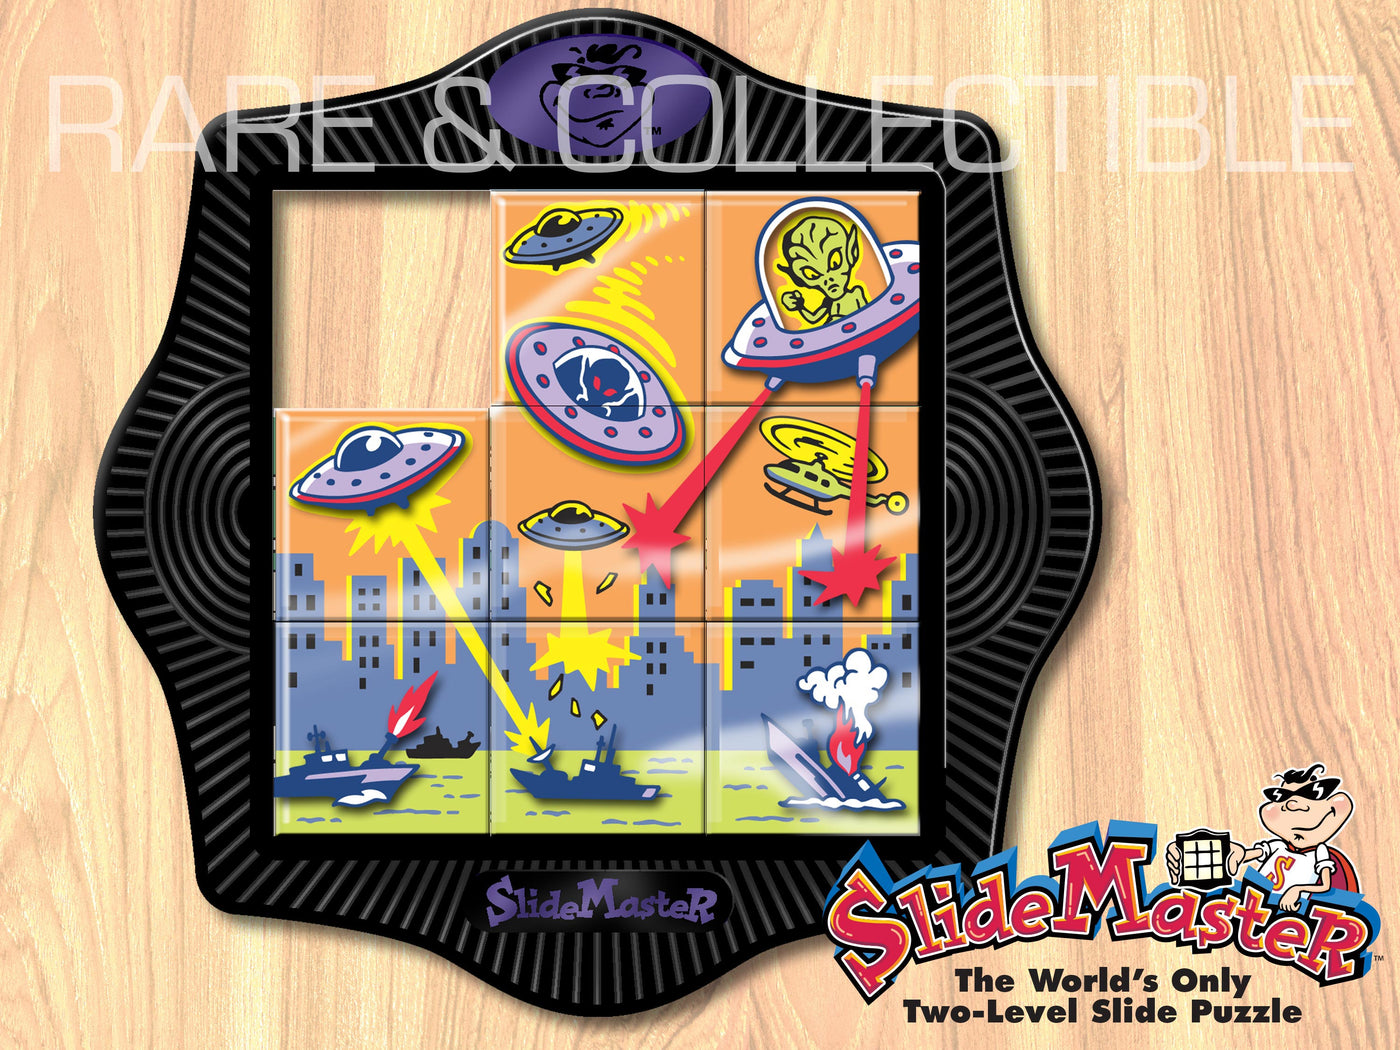 Rare and Collectible Slide Puzzle - "SlideMaster - Aliens" - by Dan Gilbert